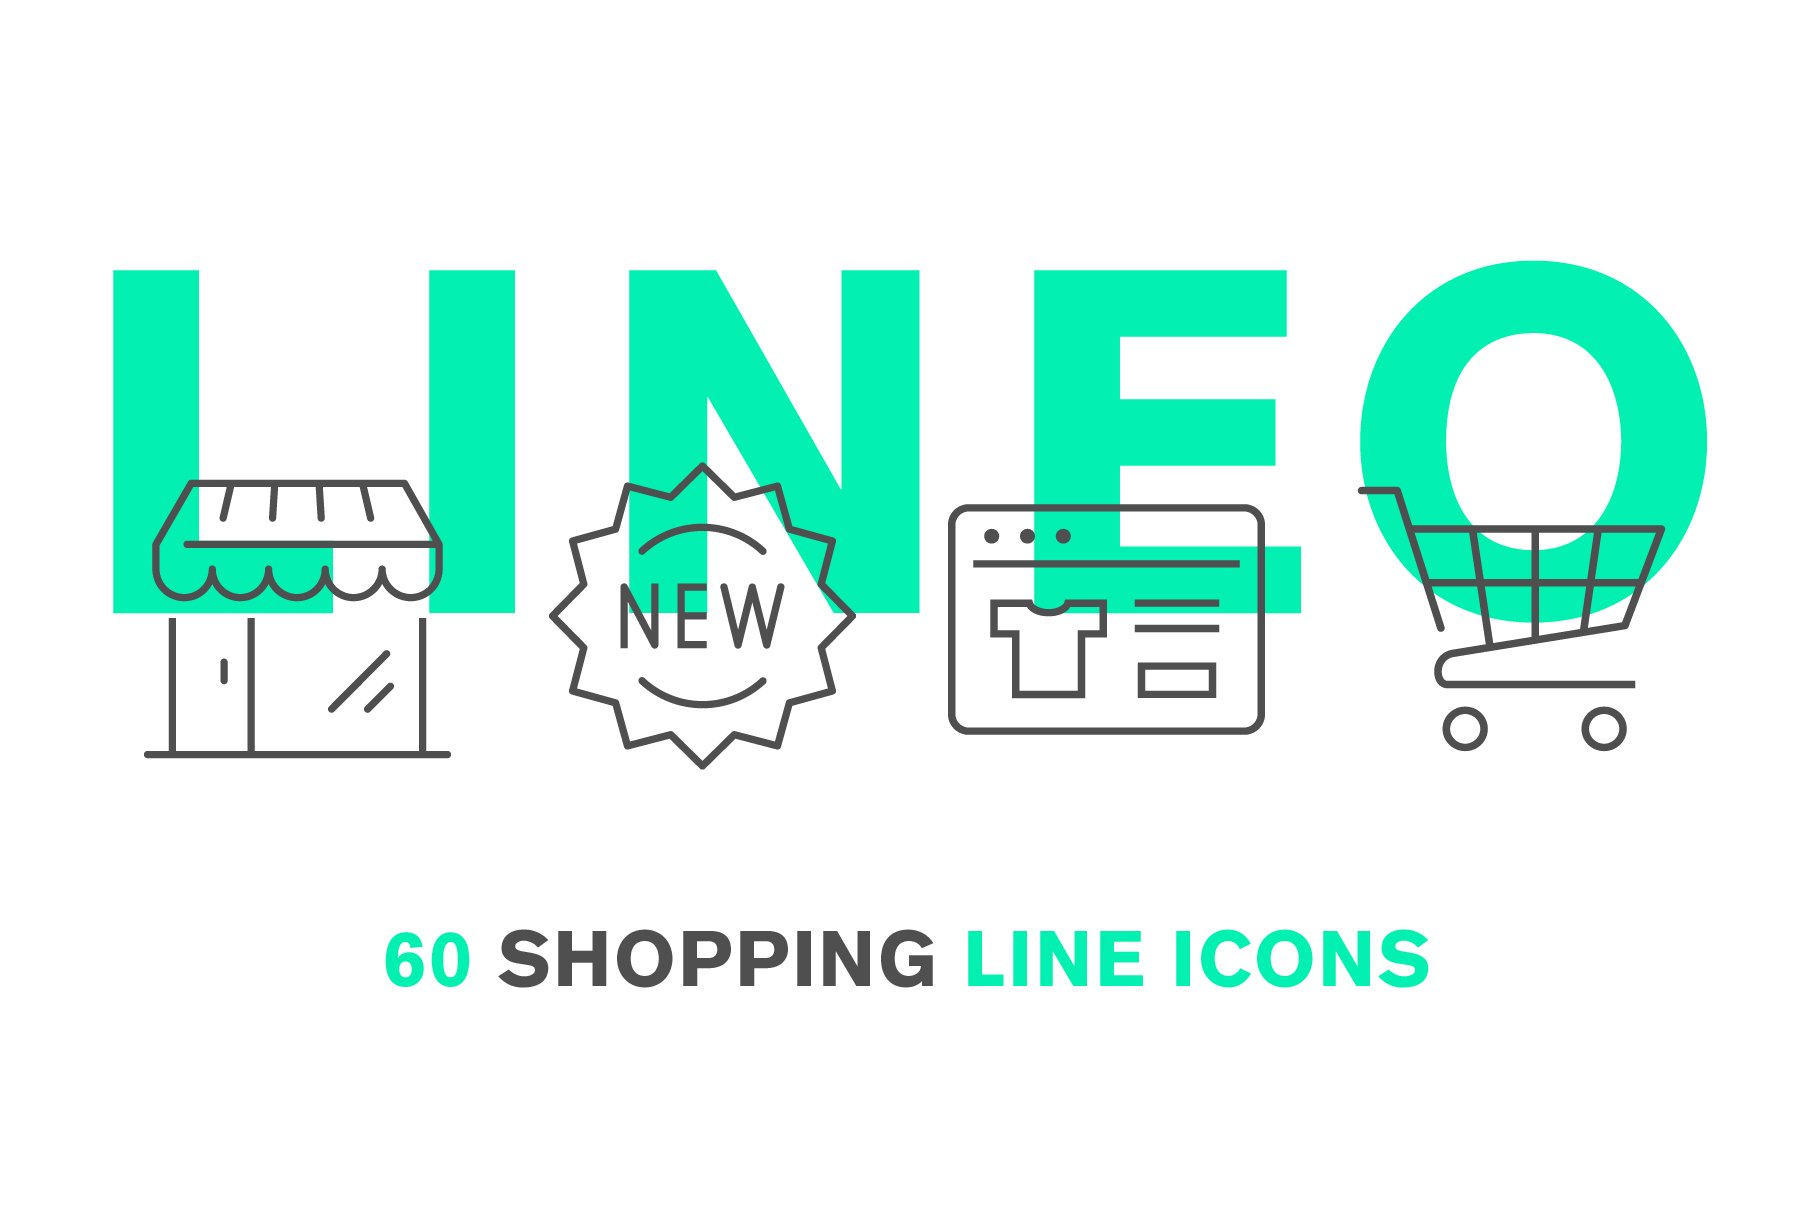 LINEO - 60 SHOPPING ICONS cover image.